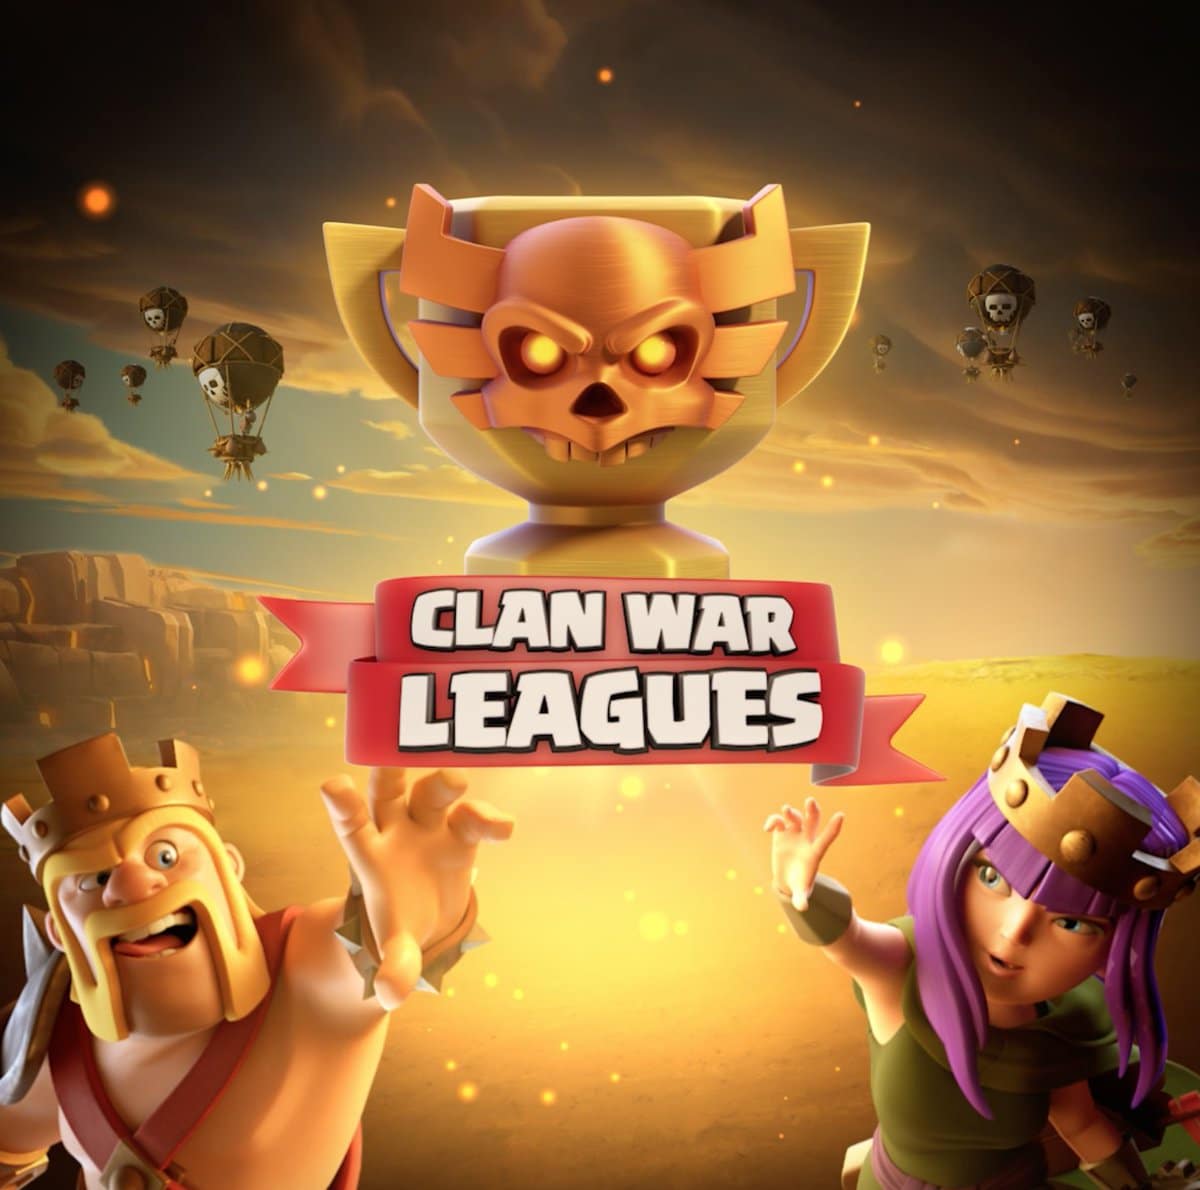 Clash of Clans on Twitter: " CLAN WAR LEAGUES are here! Sign up your ...